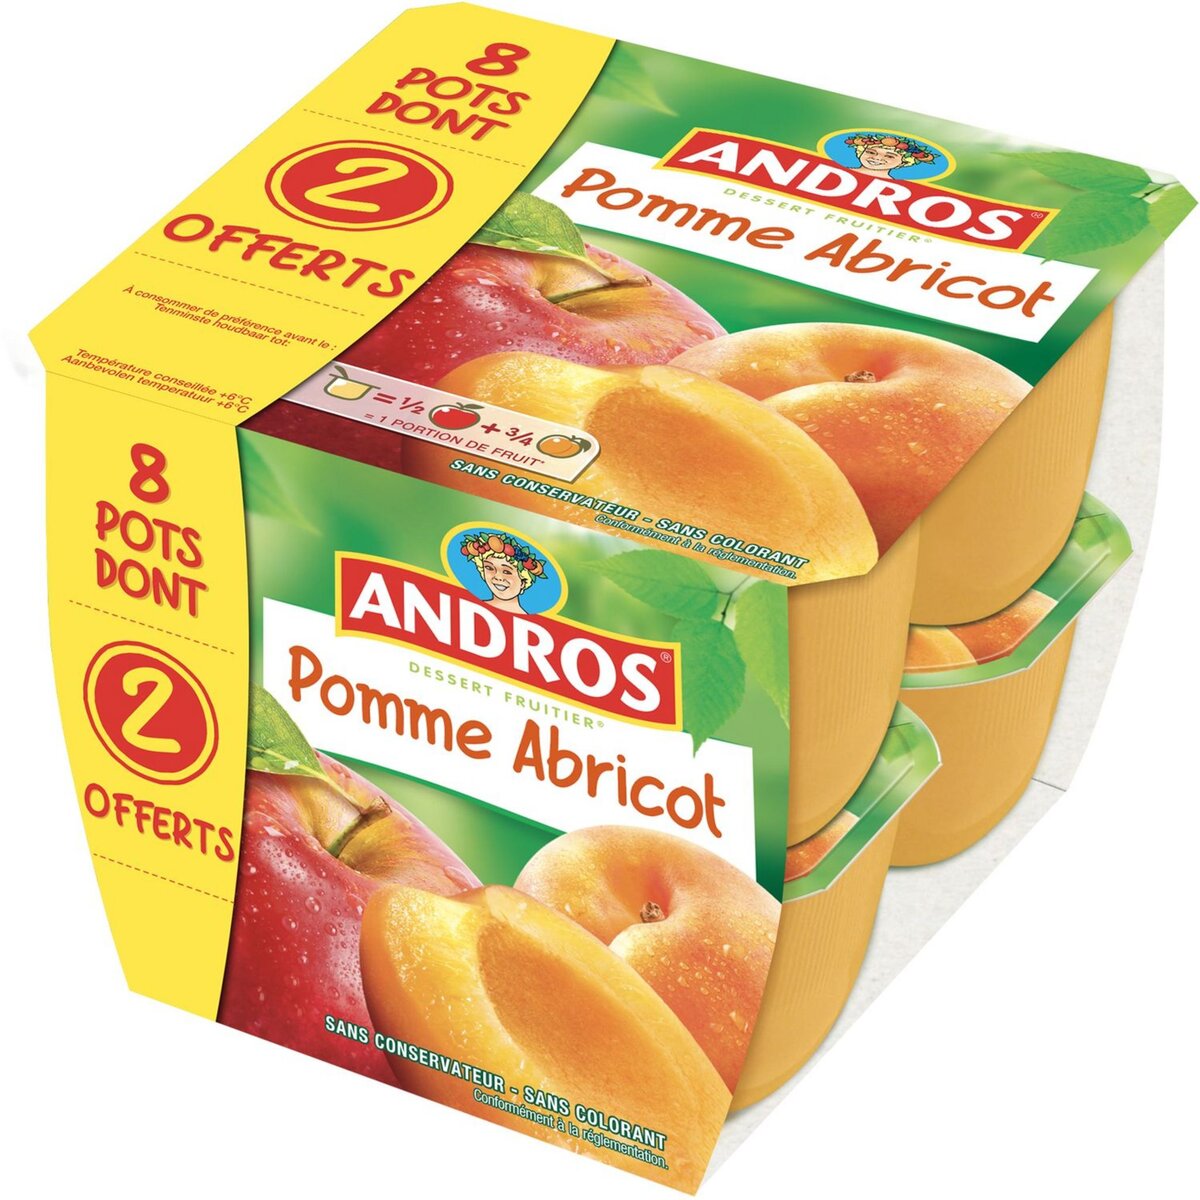 ANDROS Andros compote pomme abricot x8 dont 2offerts 800g